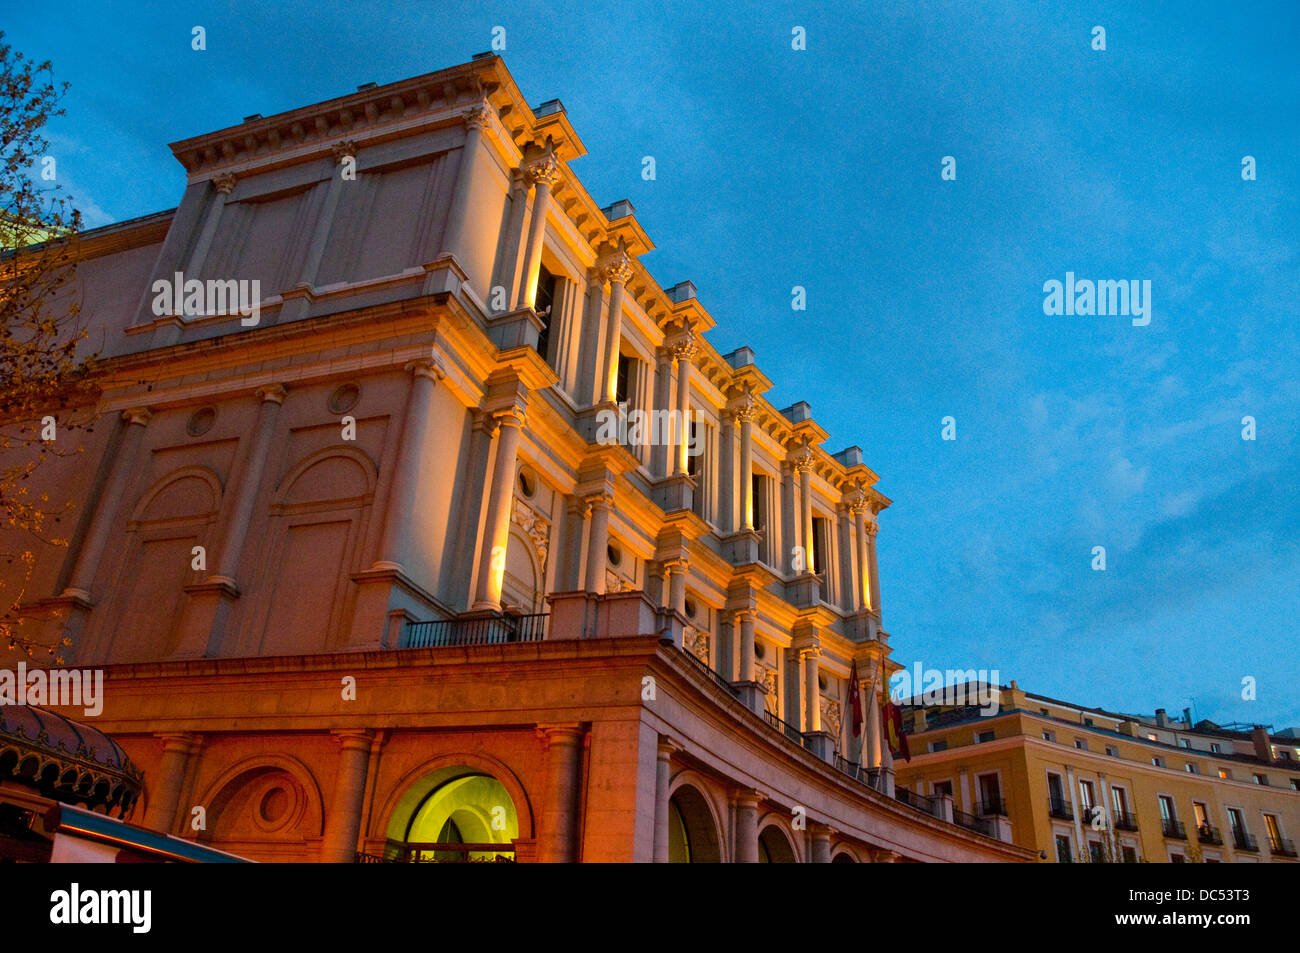 Facade of Royal Theater, night view. Oriente Square, Madrid, Spain. Stock Photo